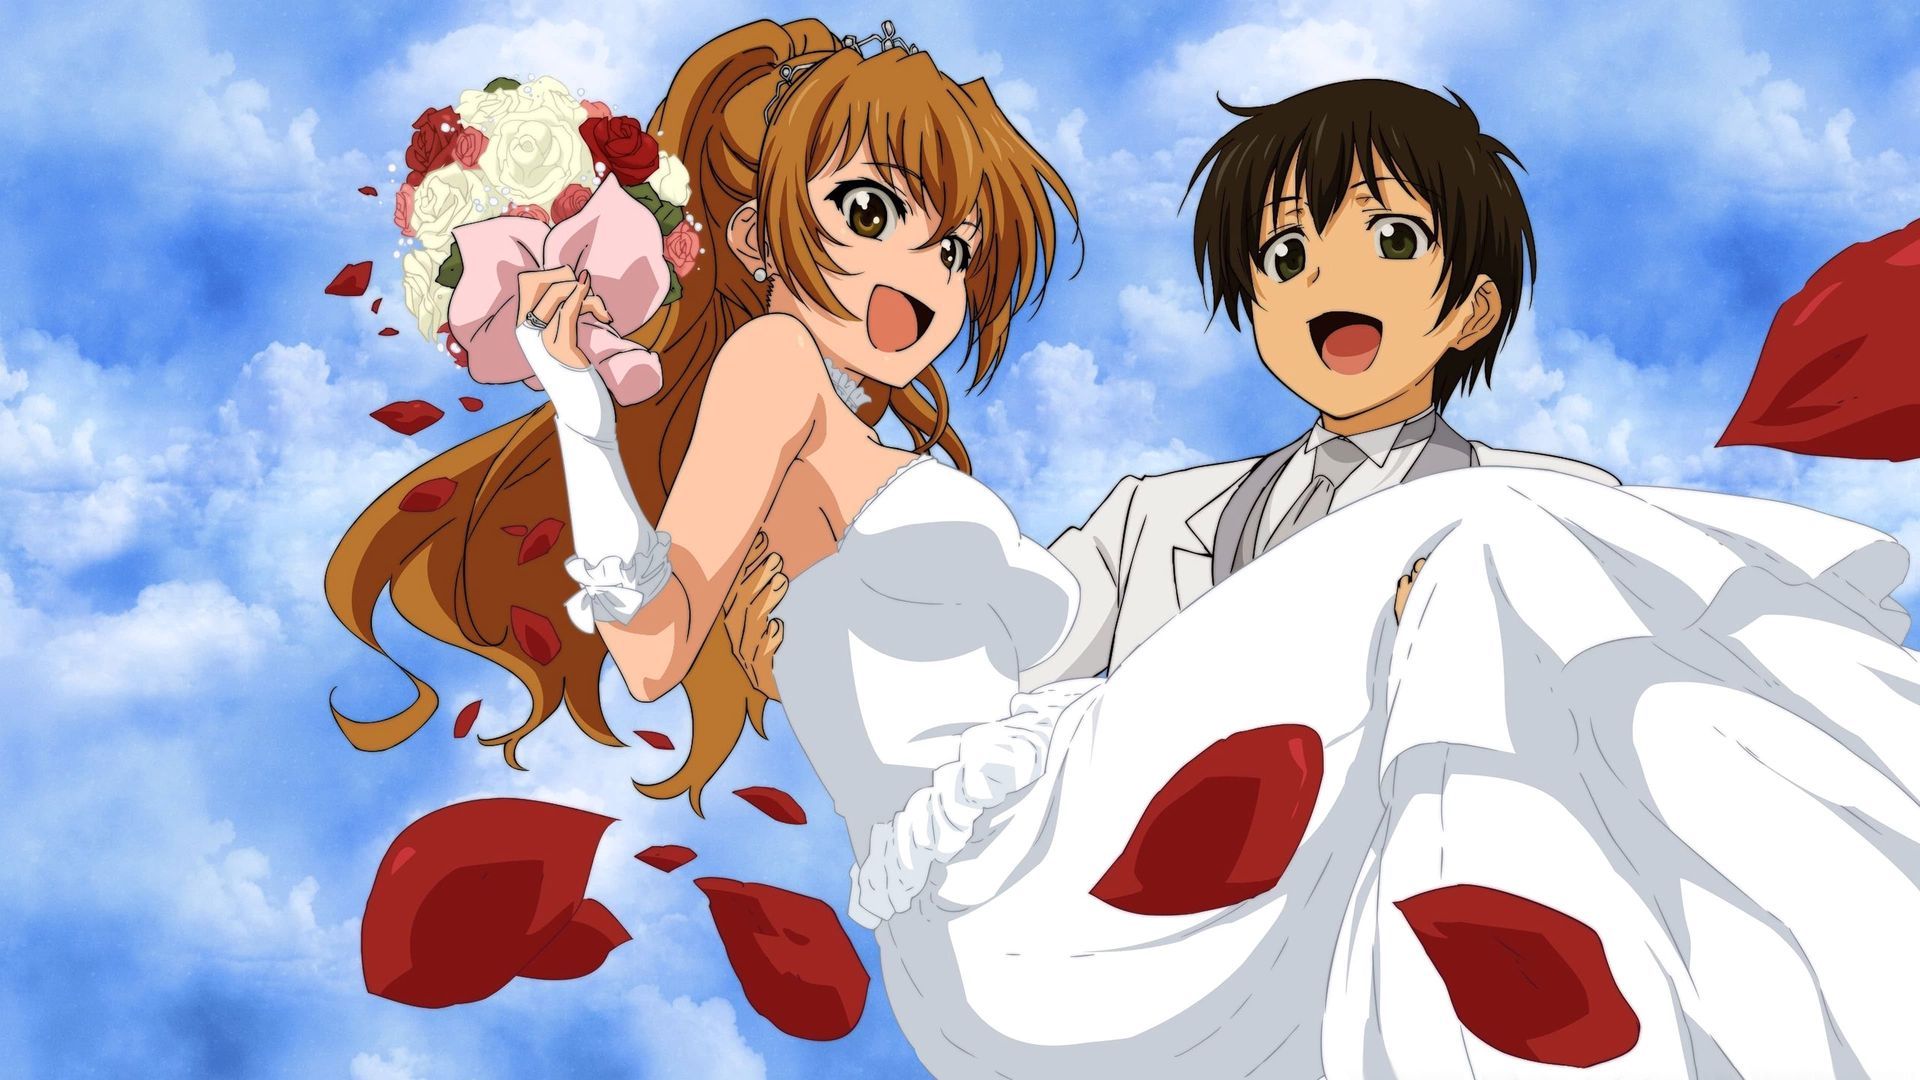 How to watch and stream Golden Time - 2013-2014 on Roku